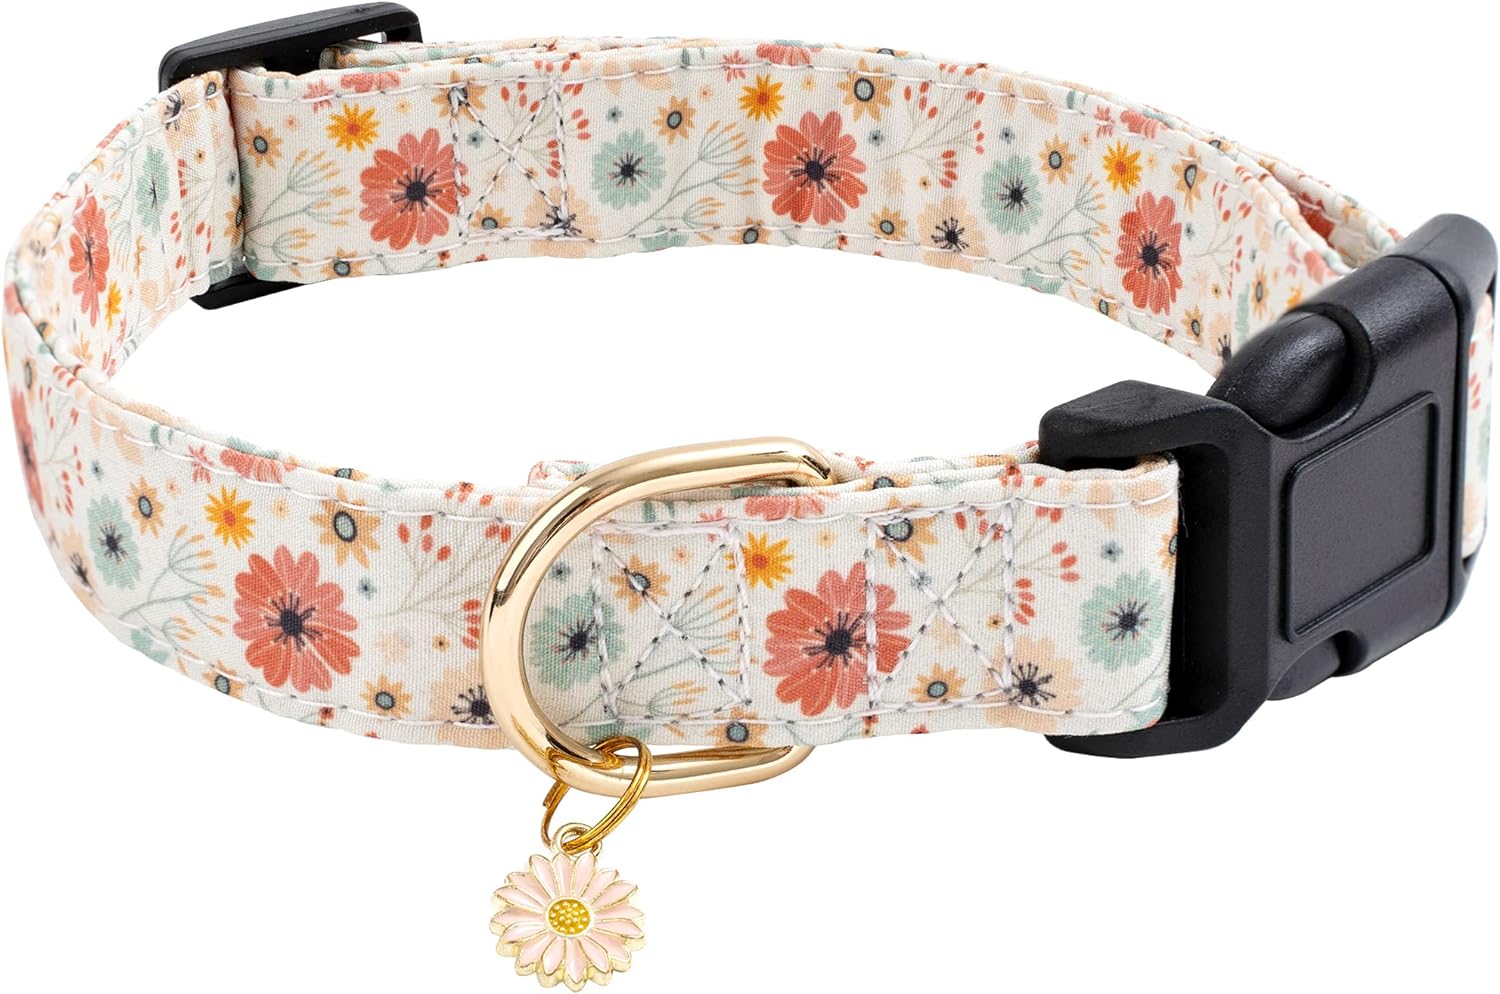 Faygarsle Cotton Designer Dogs Collar Cute Flower Dog Collars for Girl Female Small Medium Large Dogs with Flower Charms M